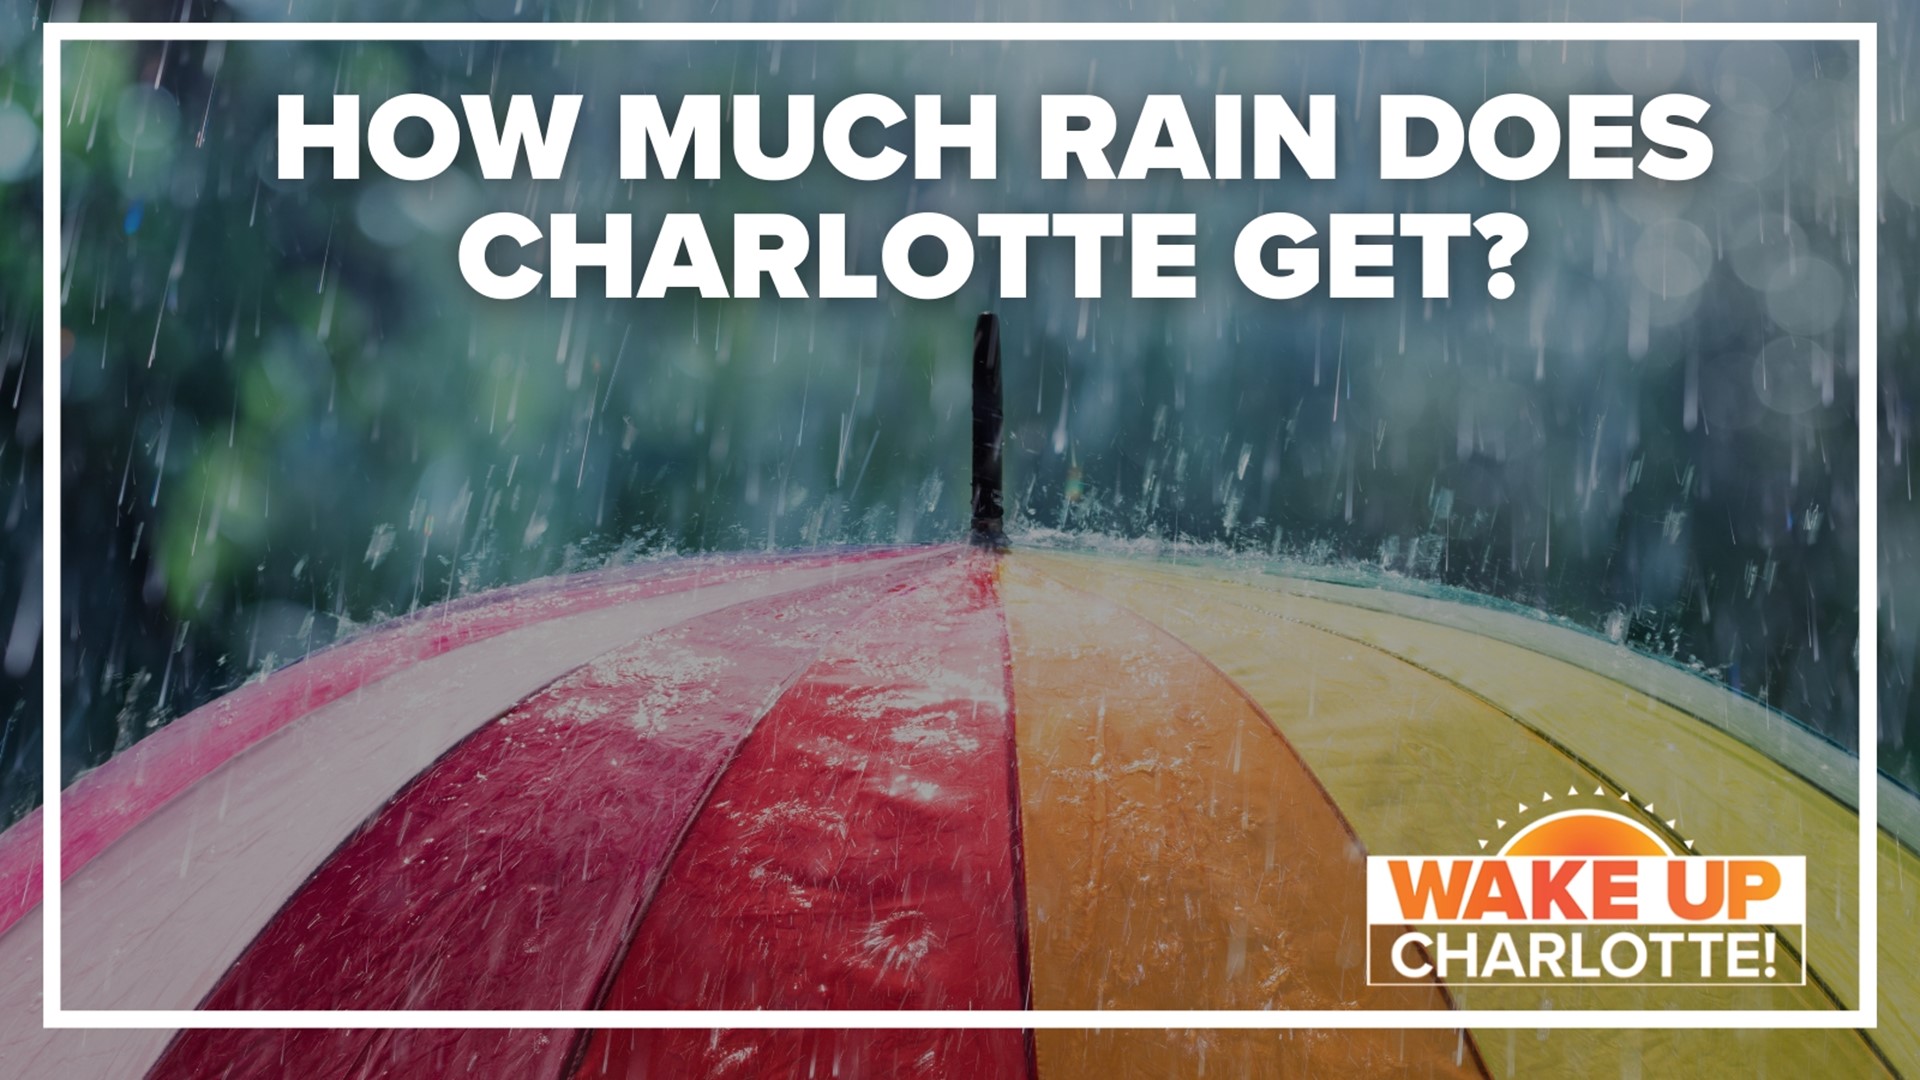 Over the past few weeks, we have seen our fair share of summer storms. How do we compare to other cities when it comes to the amount of rainfall?